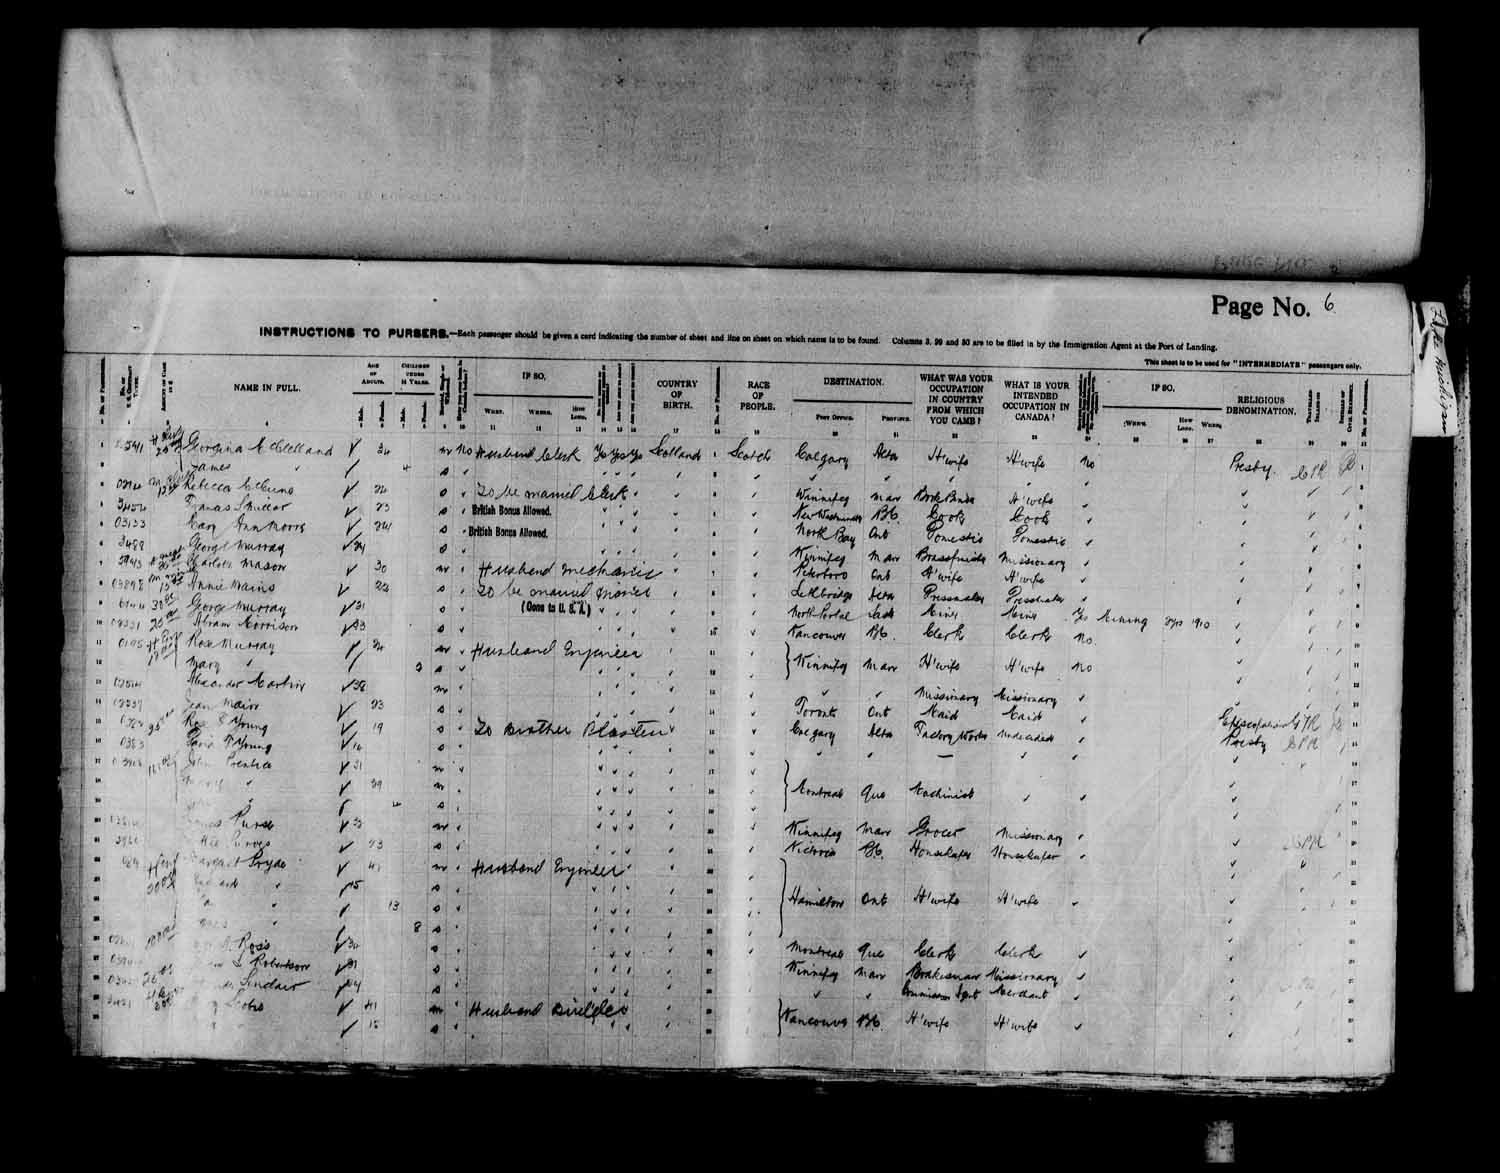 Digitized page of Passenger Lists for Image No.: e003566517